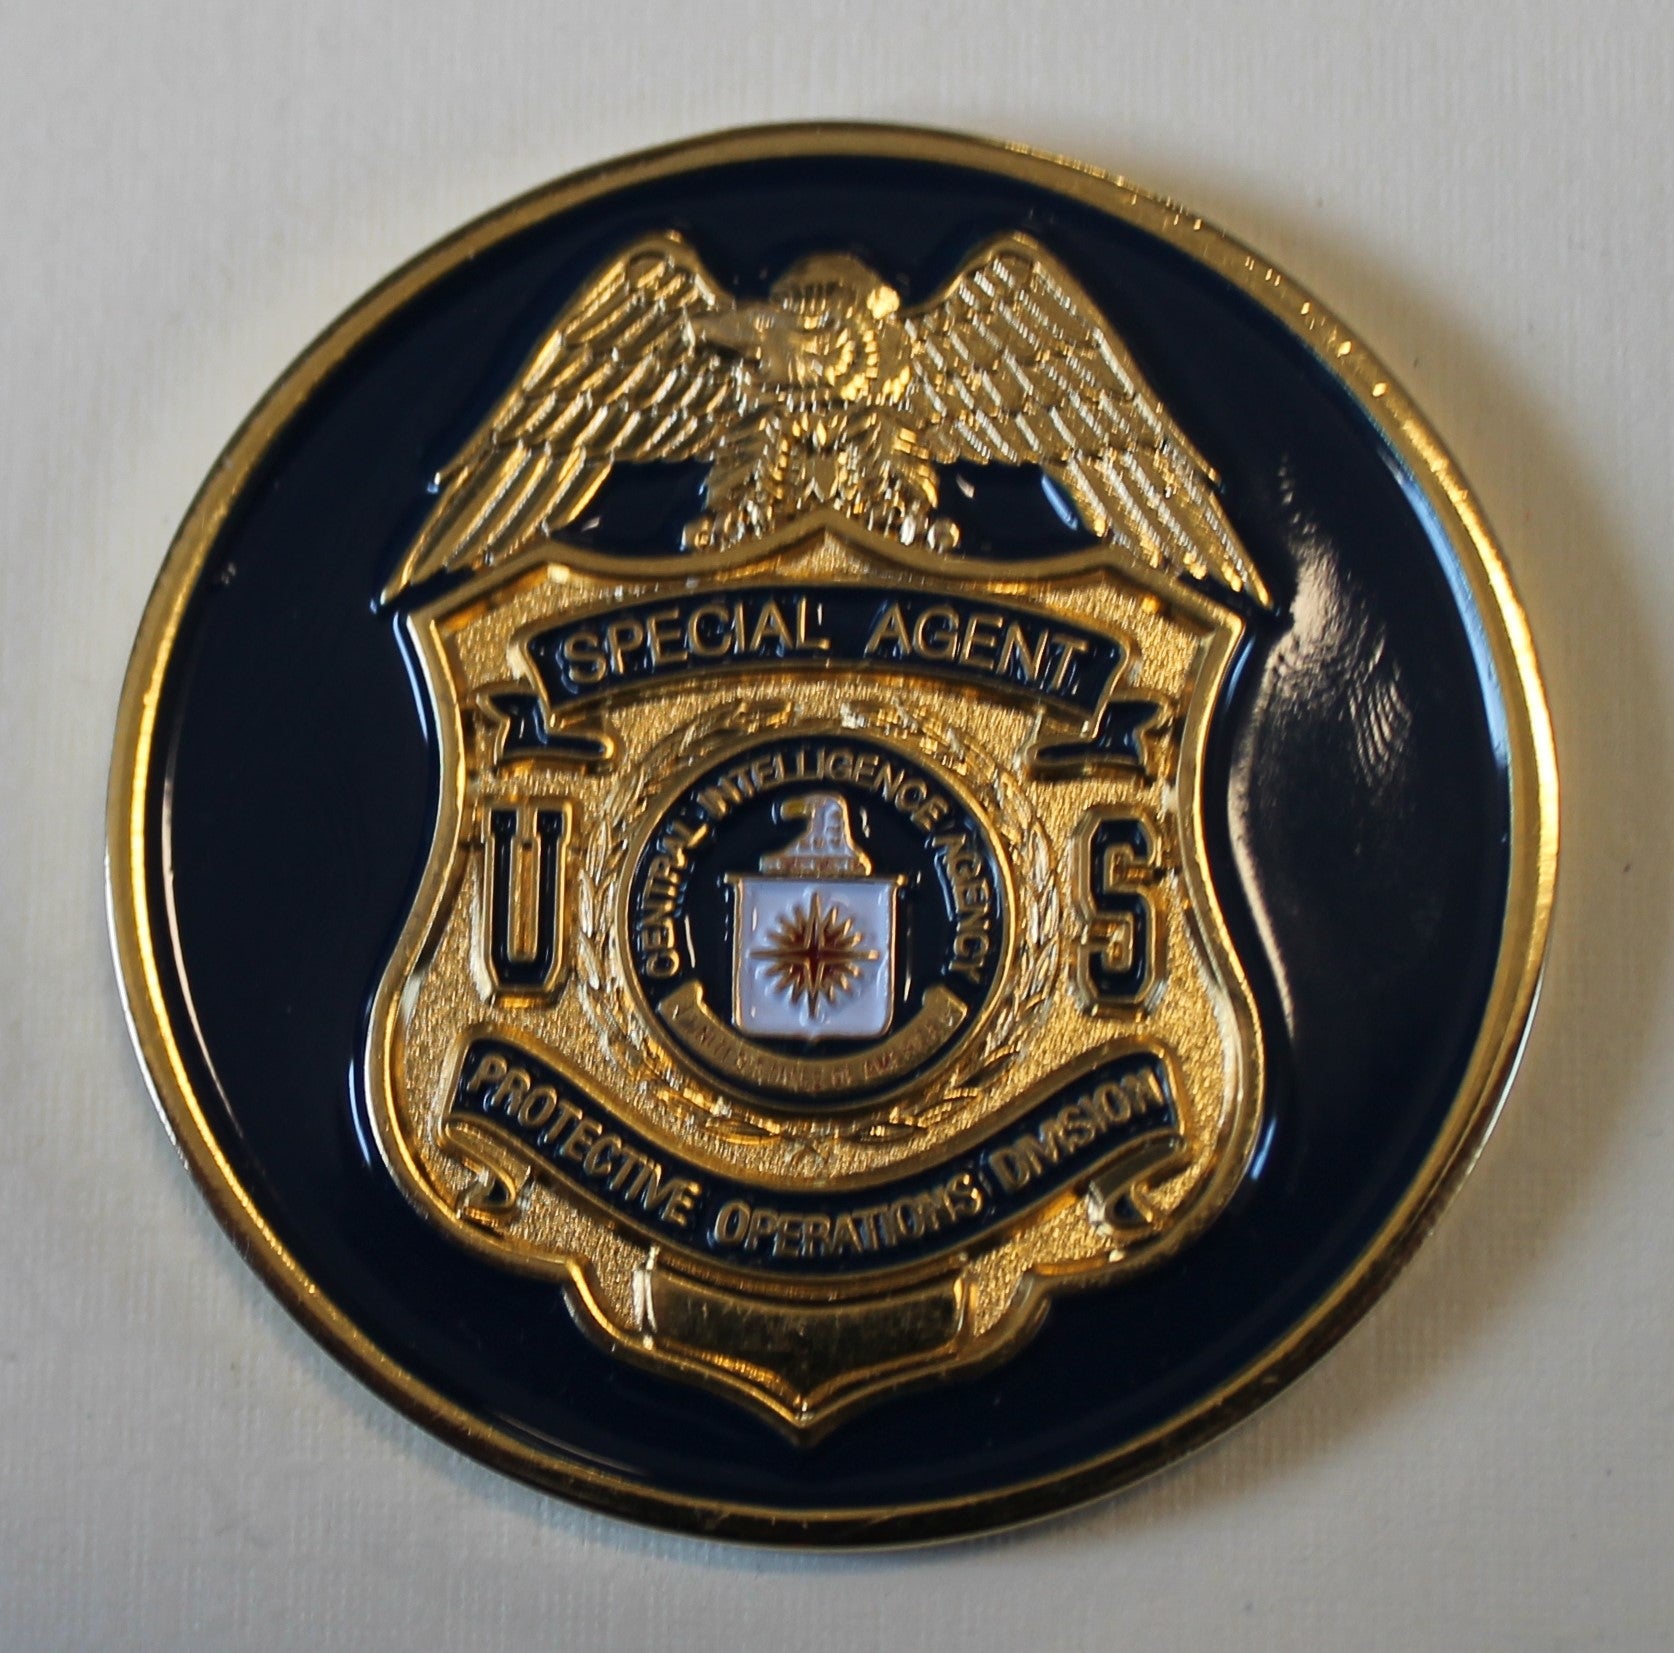 Security special agent badge - Medalcraft Mint, Inc.